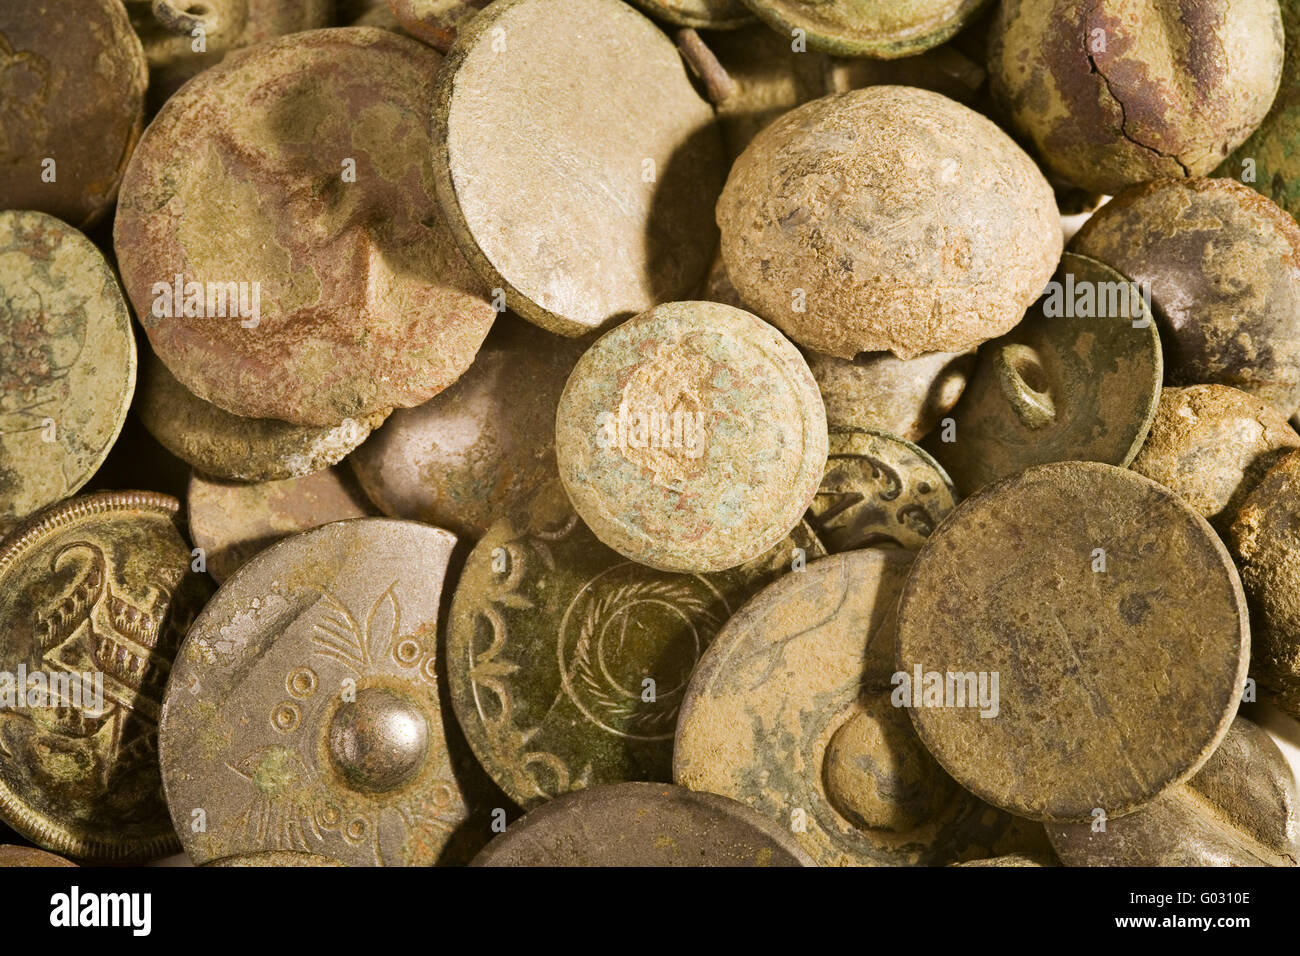 Rusty old Buttons Stock Photo